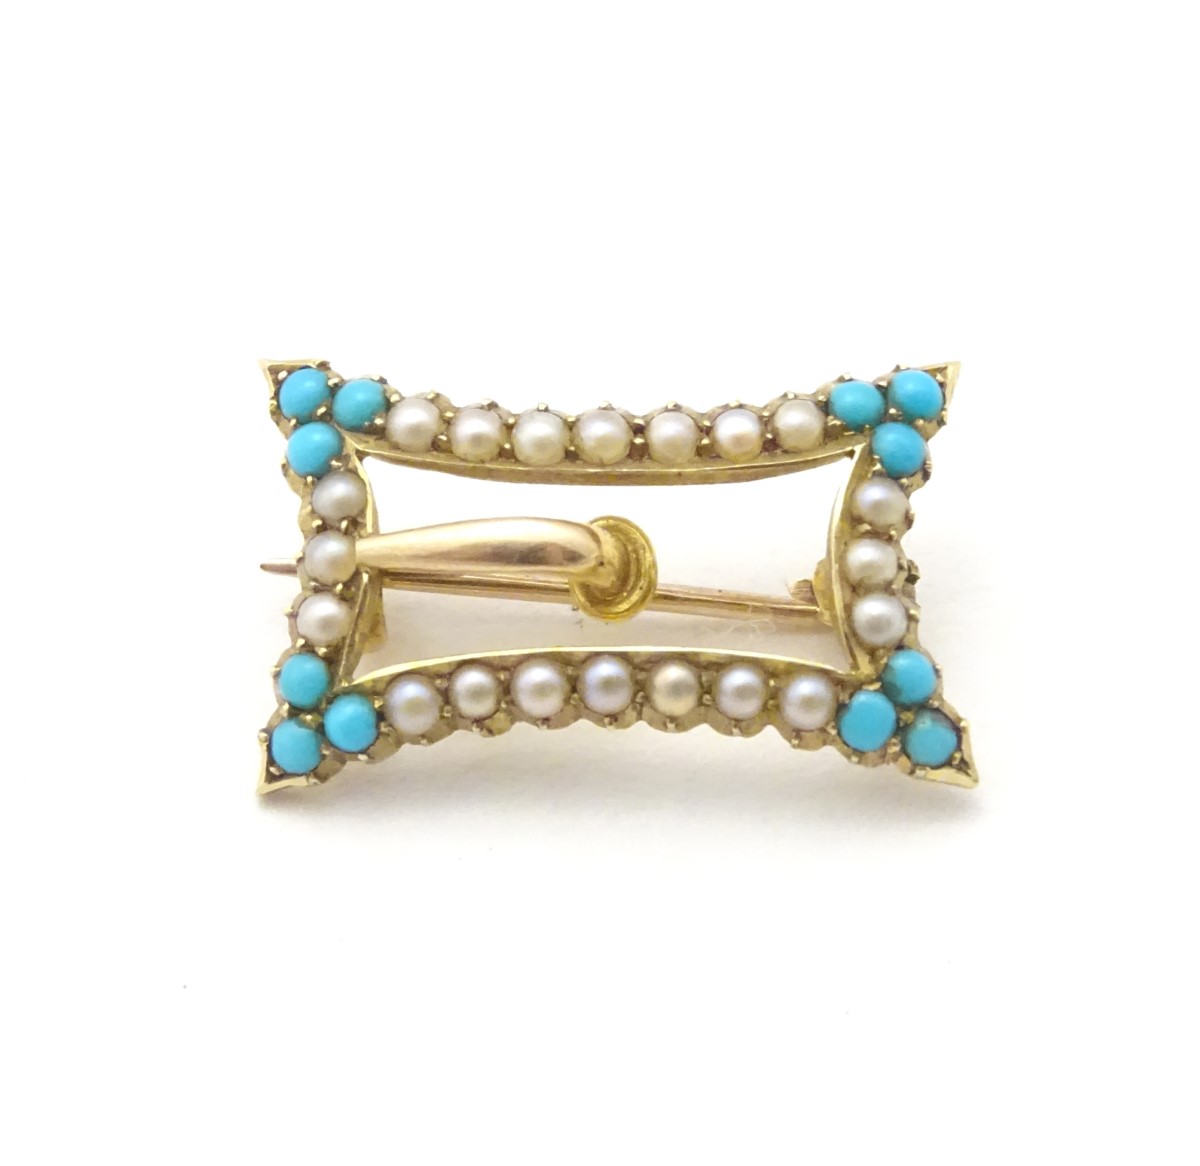 A late 19thC / early 20thC 15ct gold buckle formed brooch set with turquoise and seed pearl. - Image 5 of 9